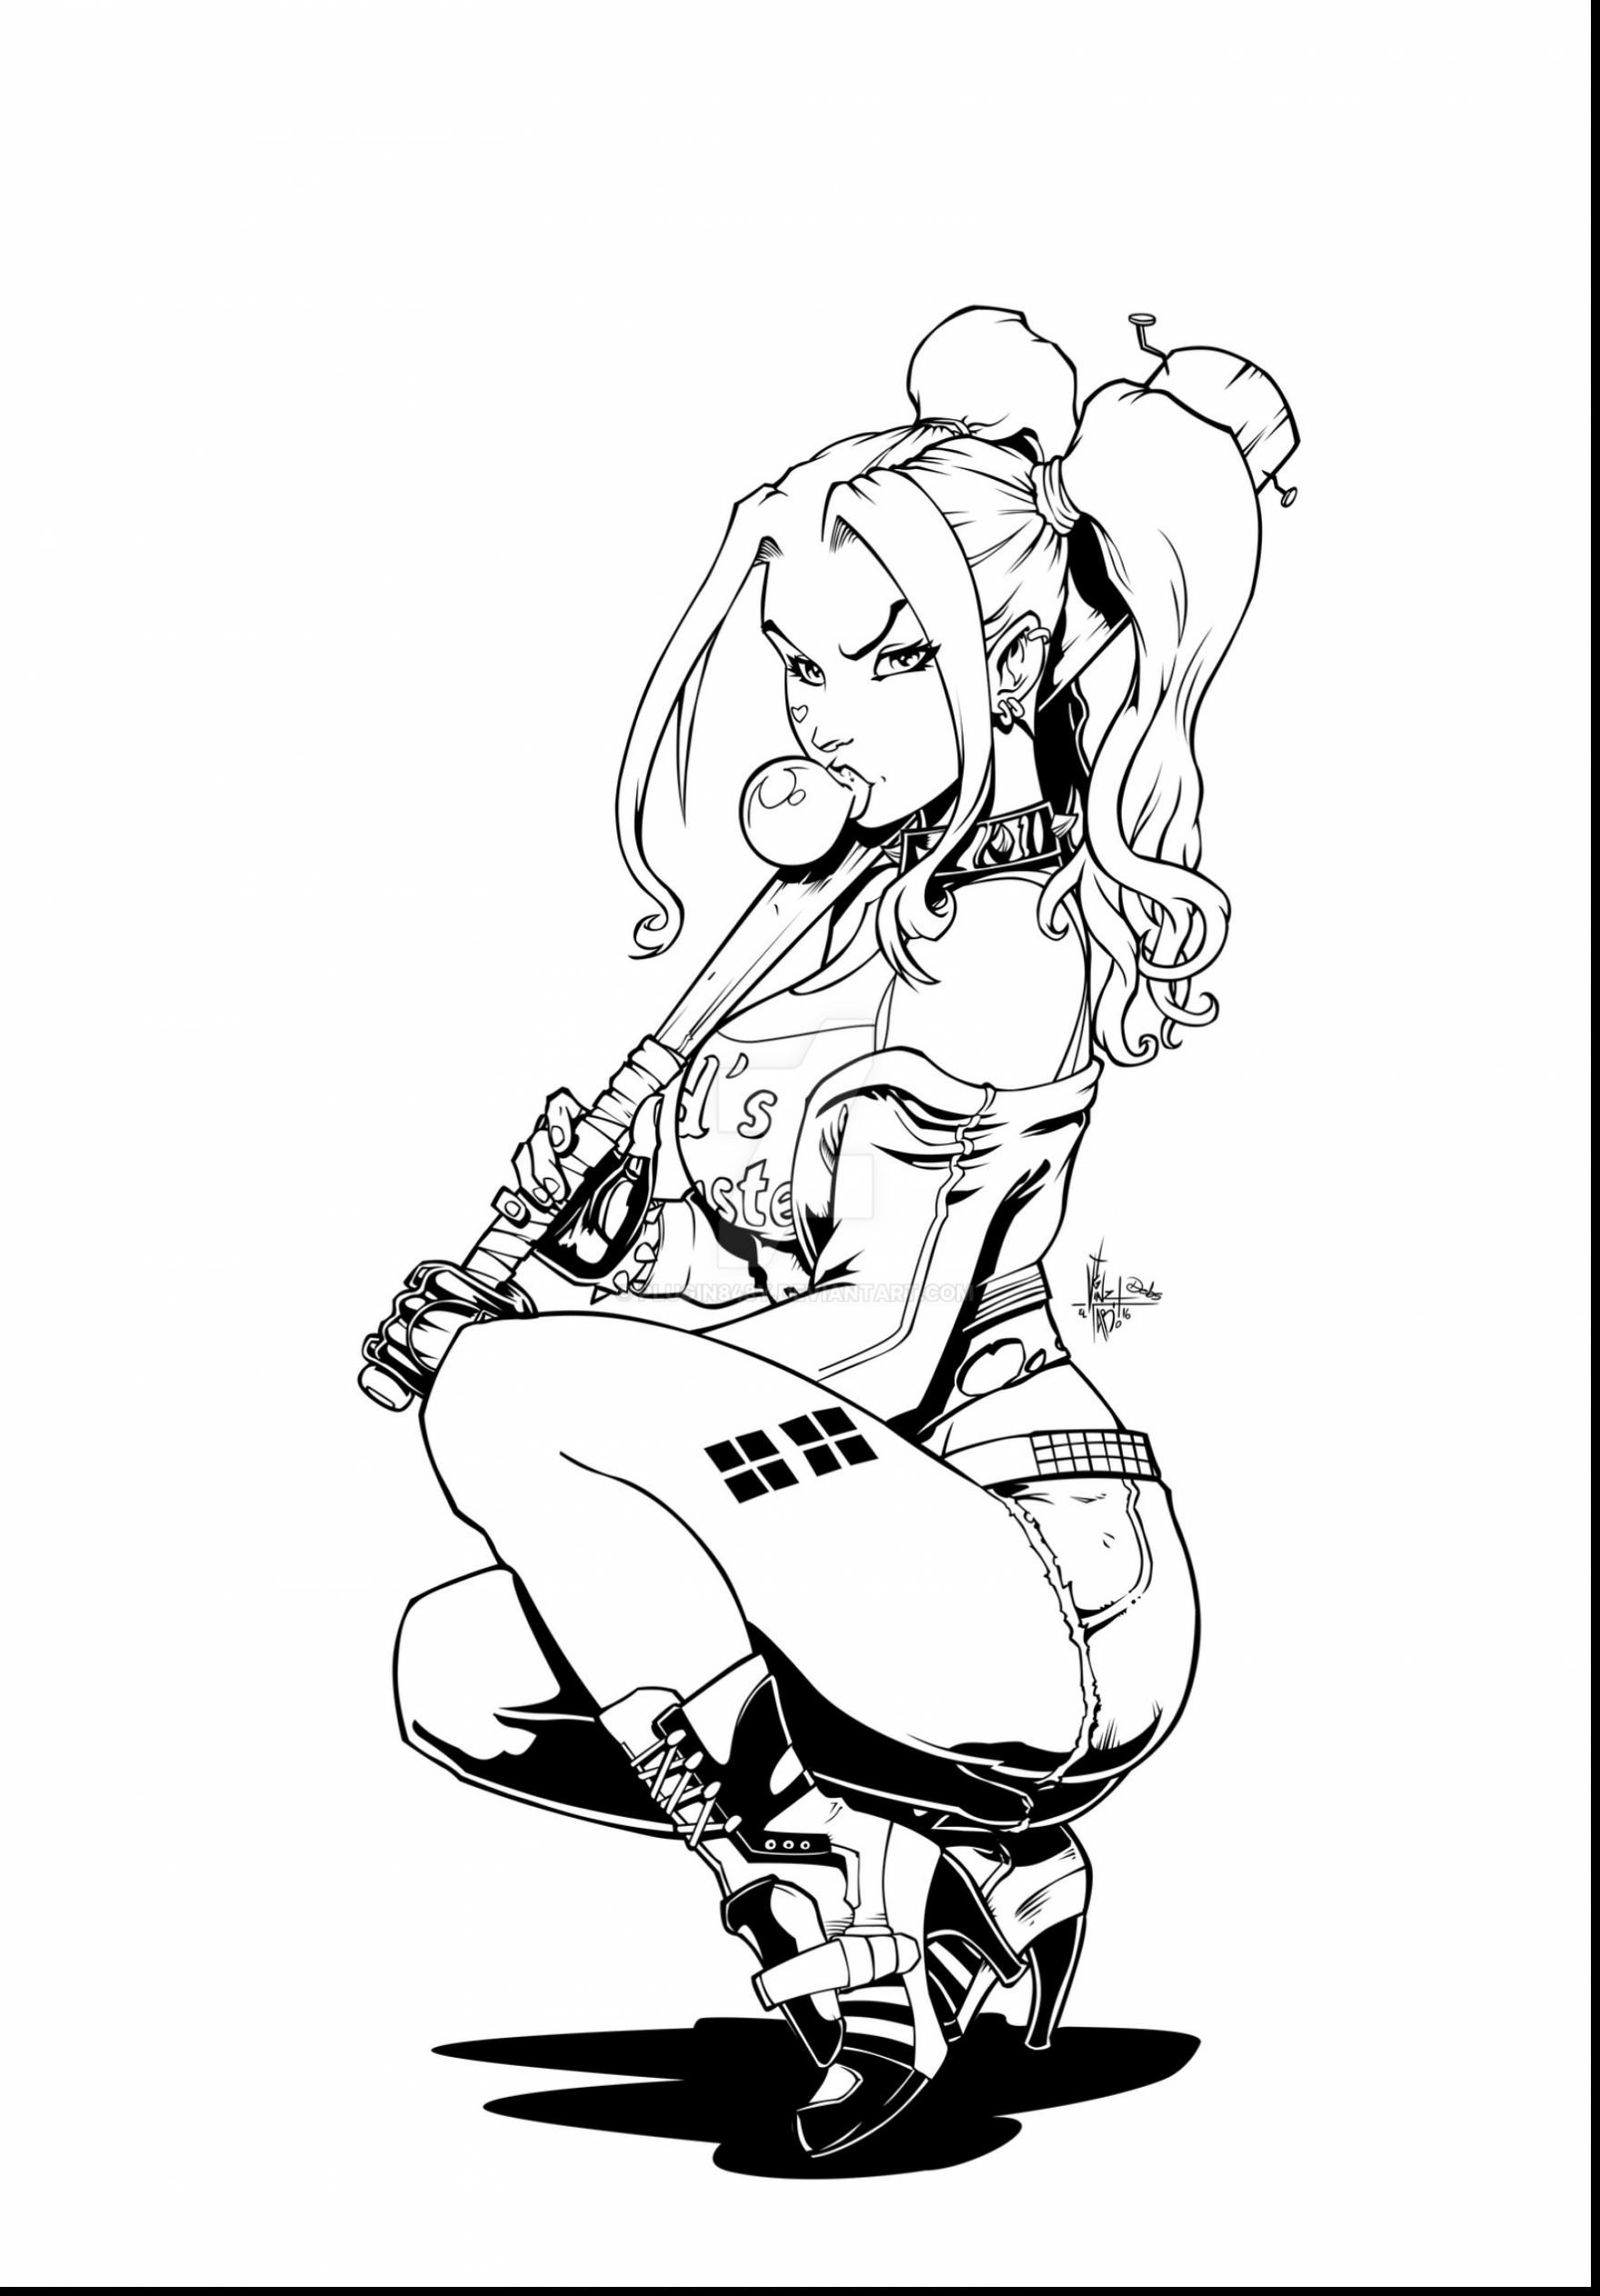 Harley Quinn Coloring Pages To Print Harley Quinn Coloring Pages To Print Out Printable Coloring Pages